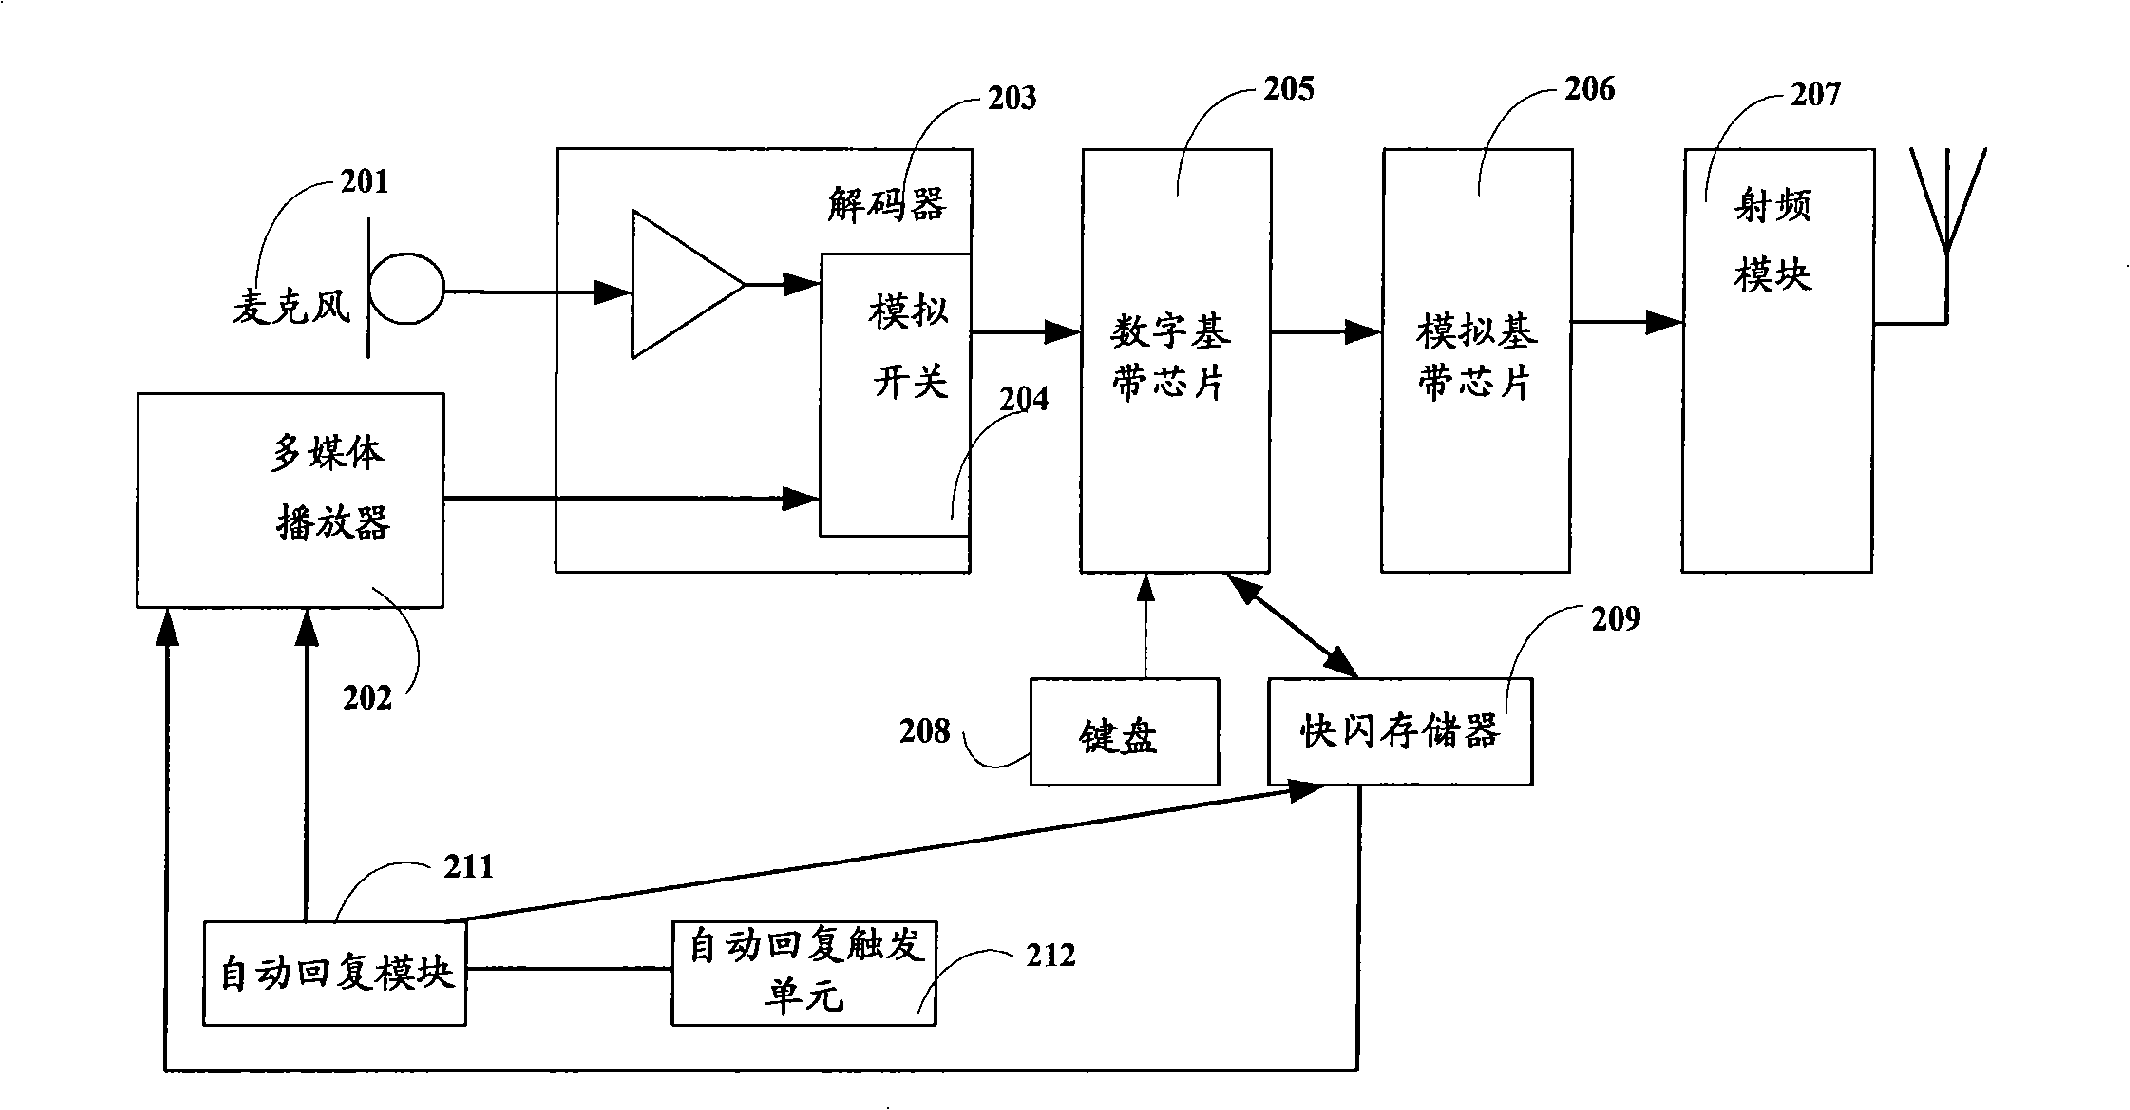 Mobile terminal with automatic replying function and method thereof